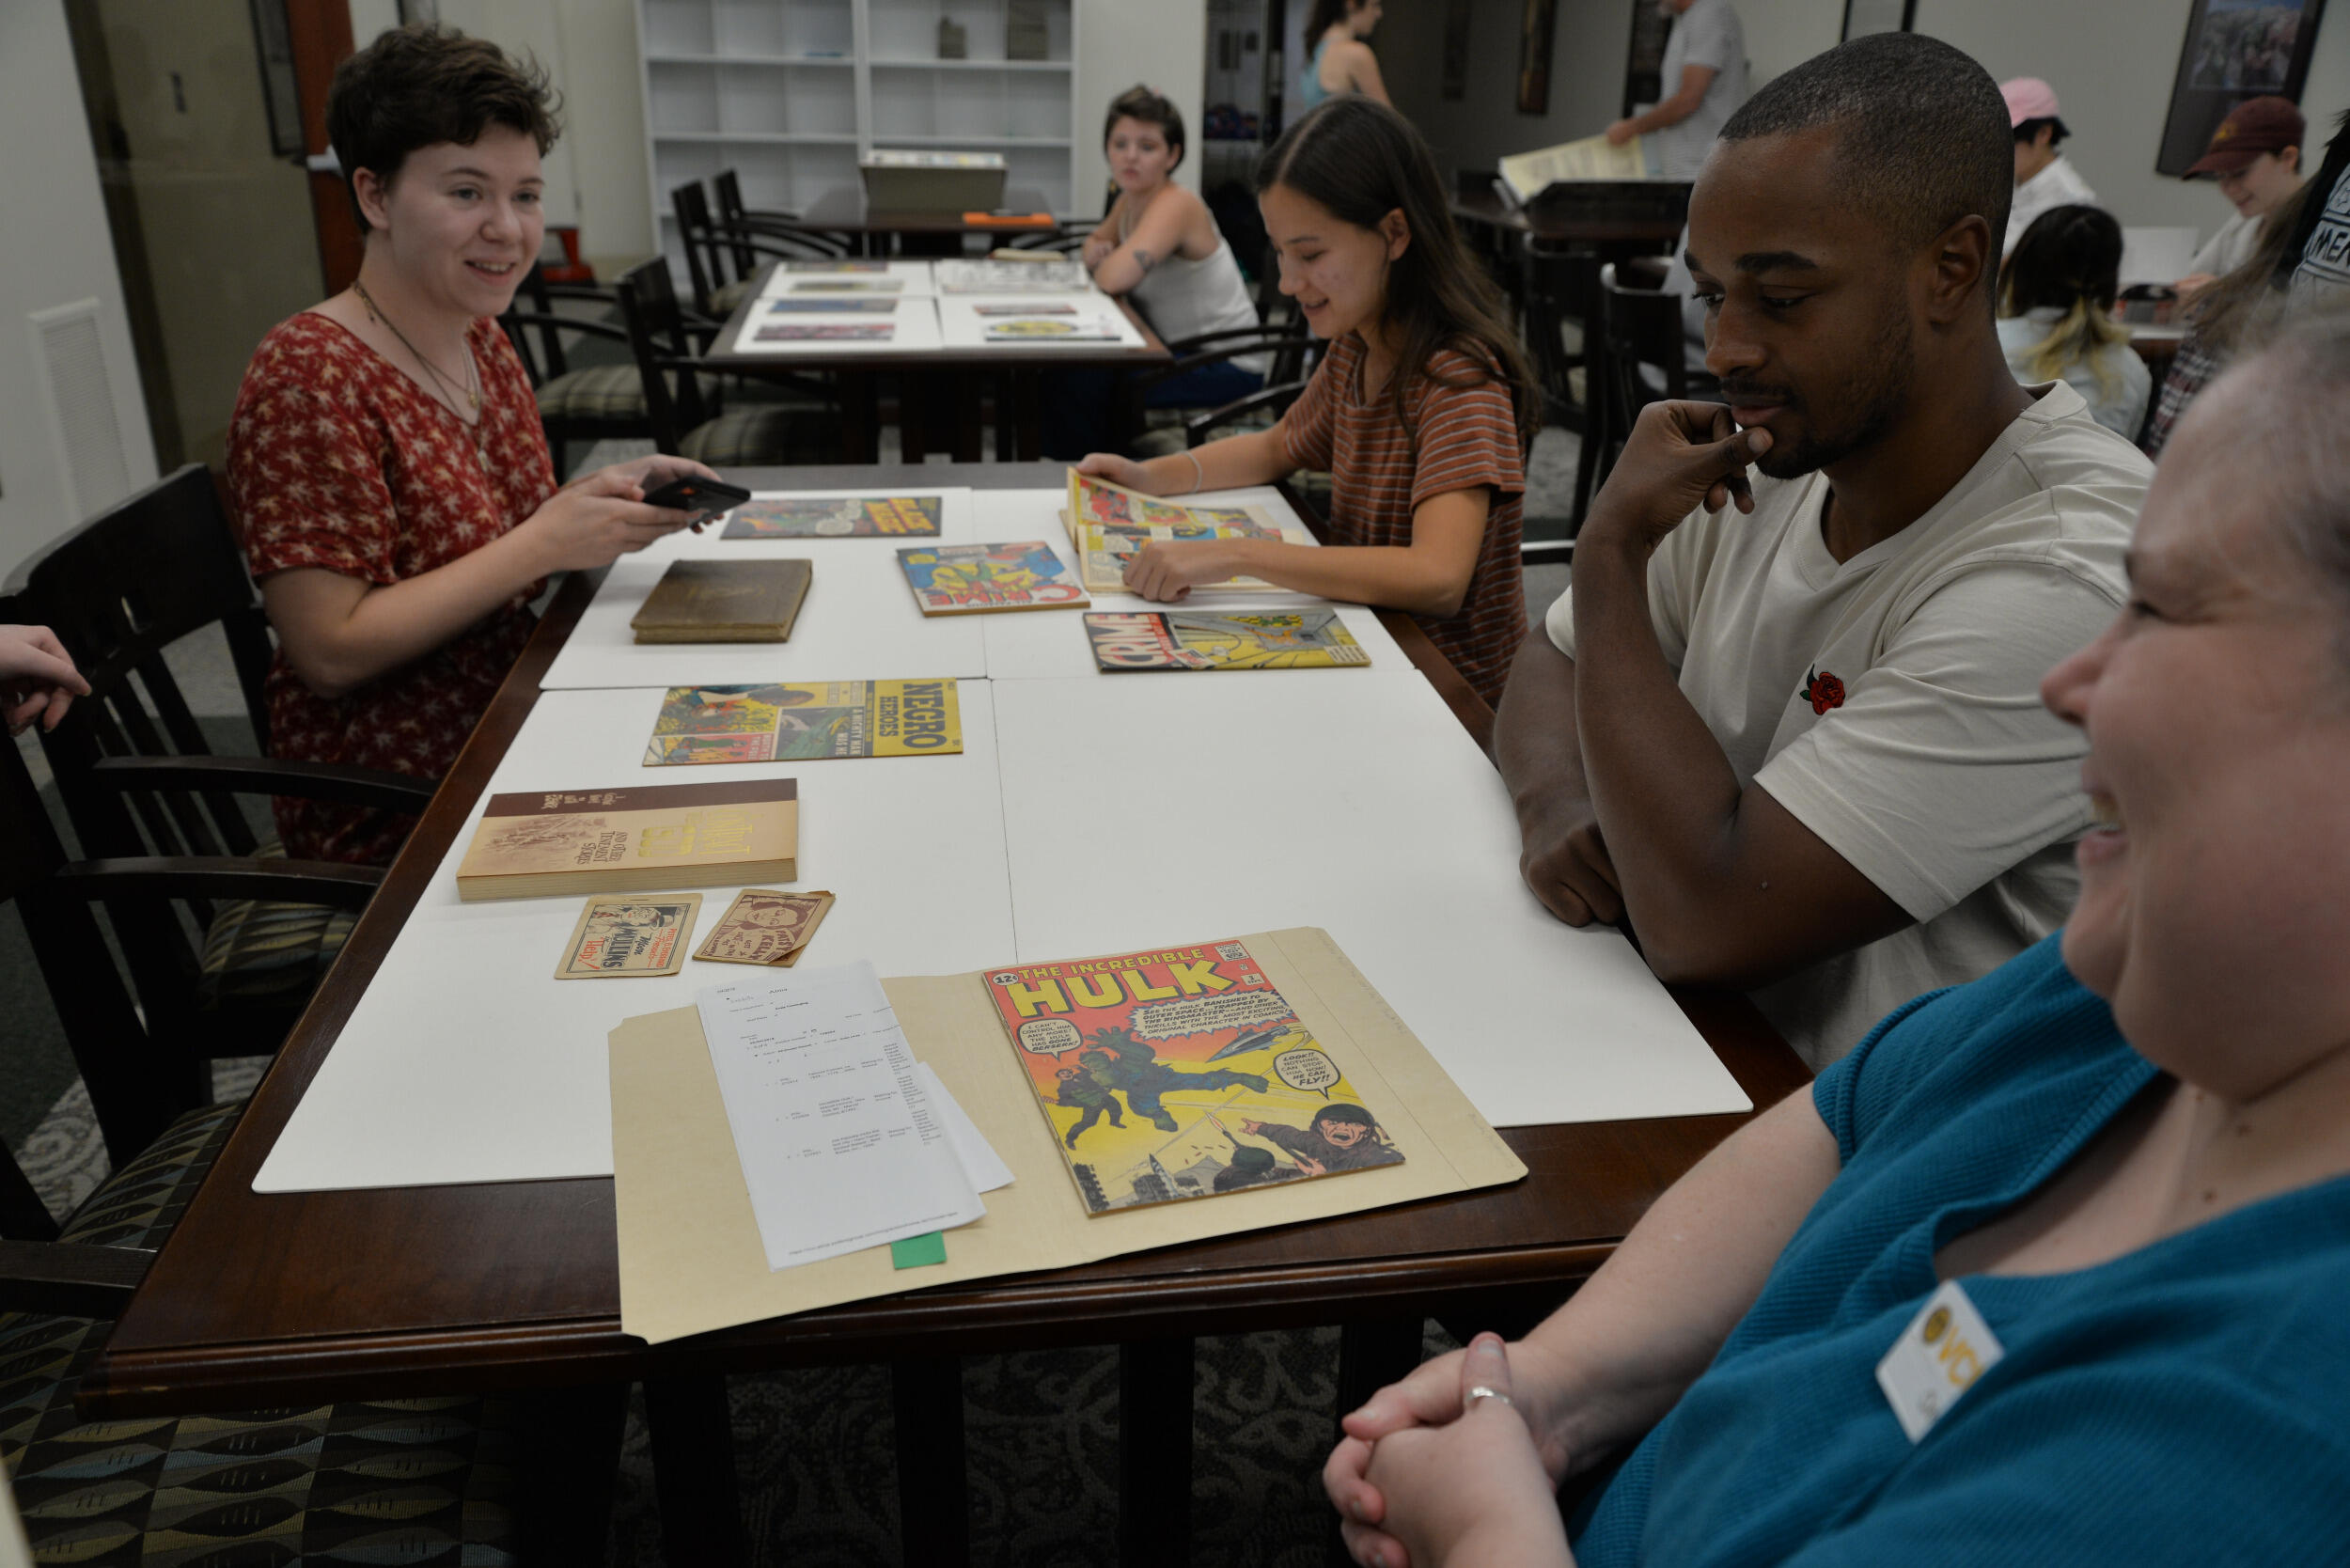 Students sit at a long table with comics issues on the table. Cindy Jackson is smiling in the foreground at the end of the table.